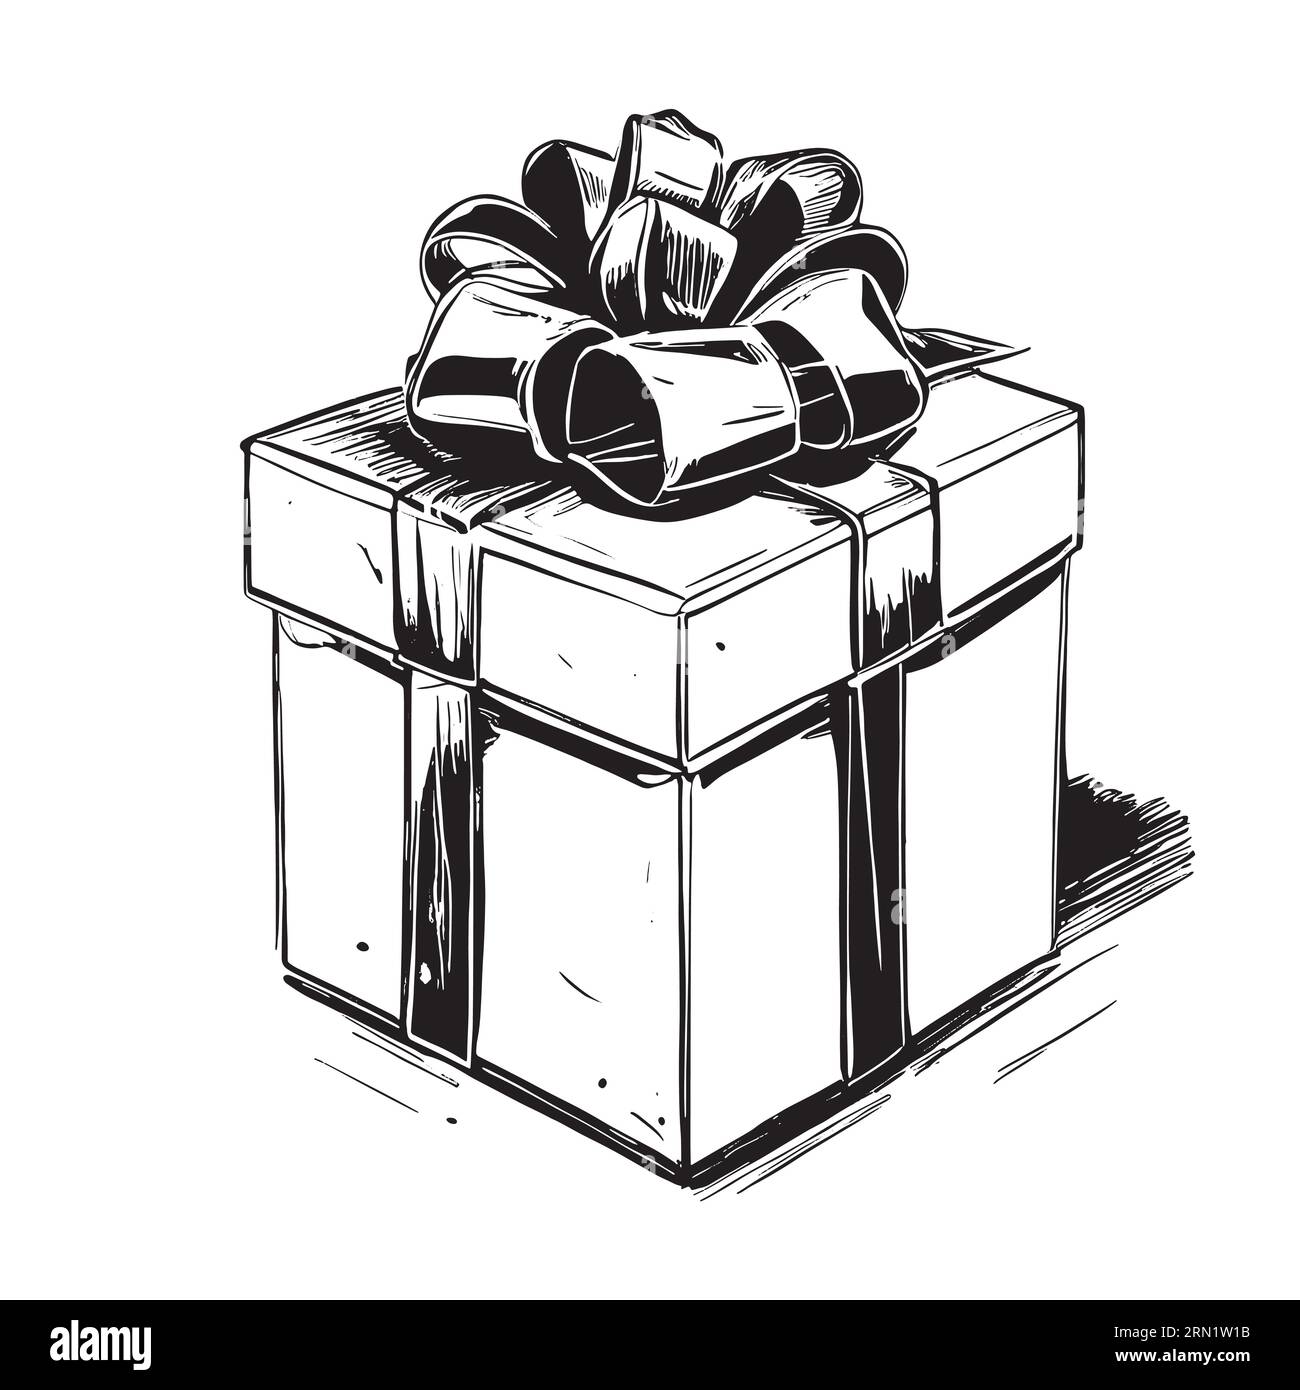 https://c8.alamy.com/comp/2RN1W1B/hand-drawn-sketch-of-gift-box-vector-illustration-isolated-on-white-background-2RN1W1B.jpg